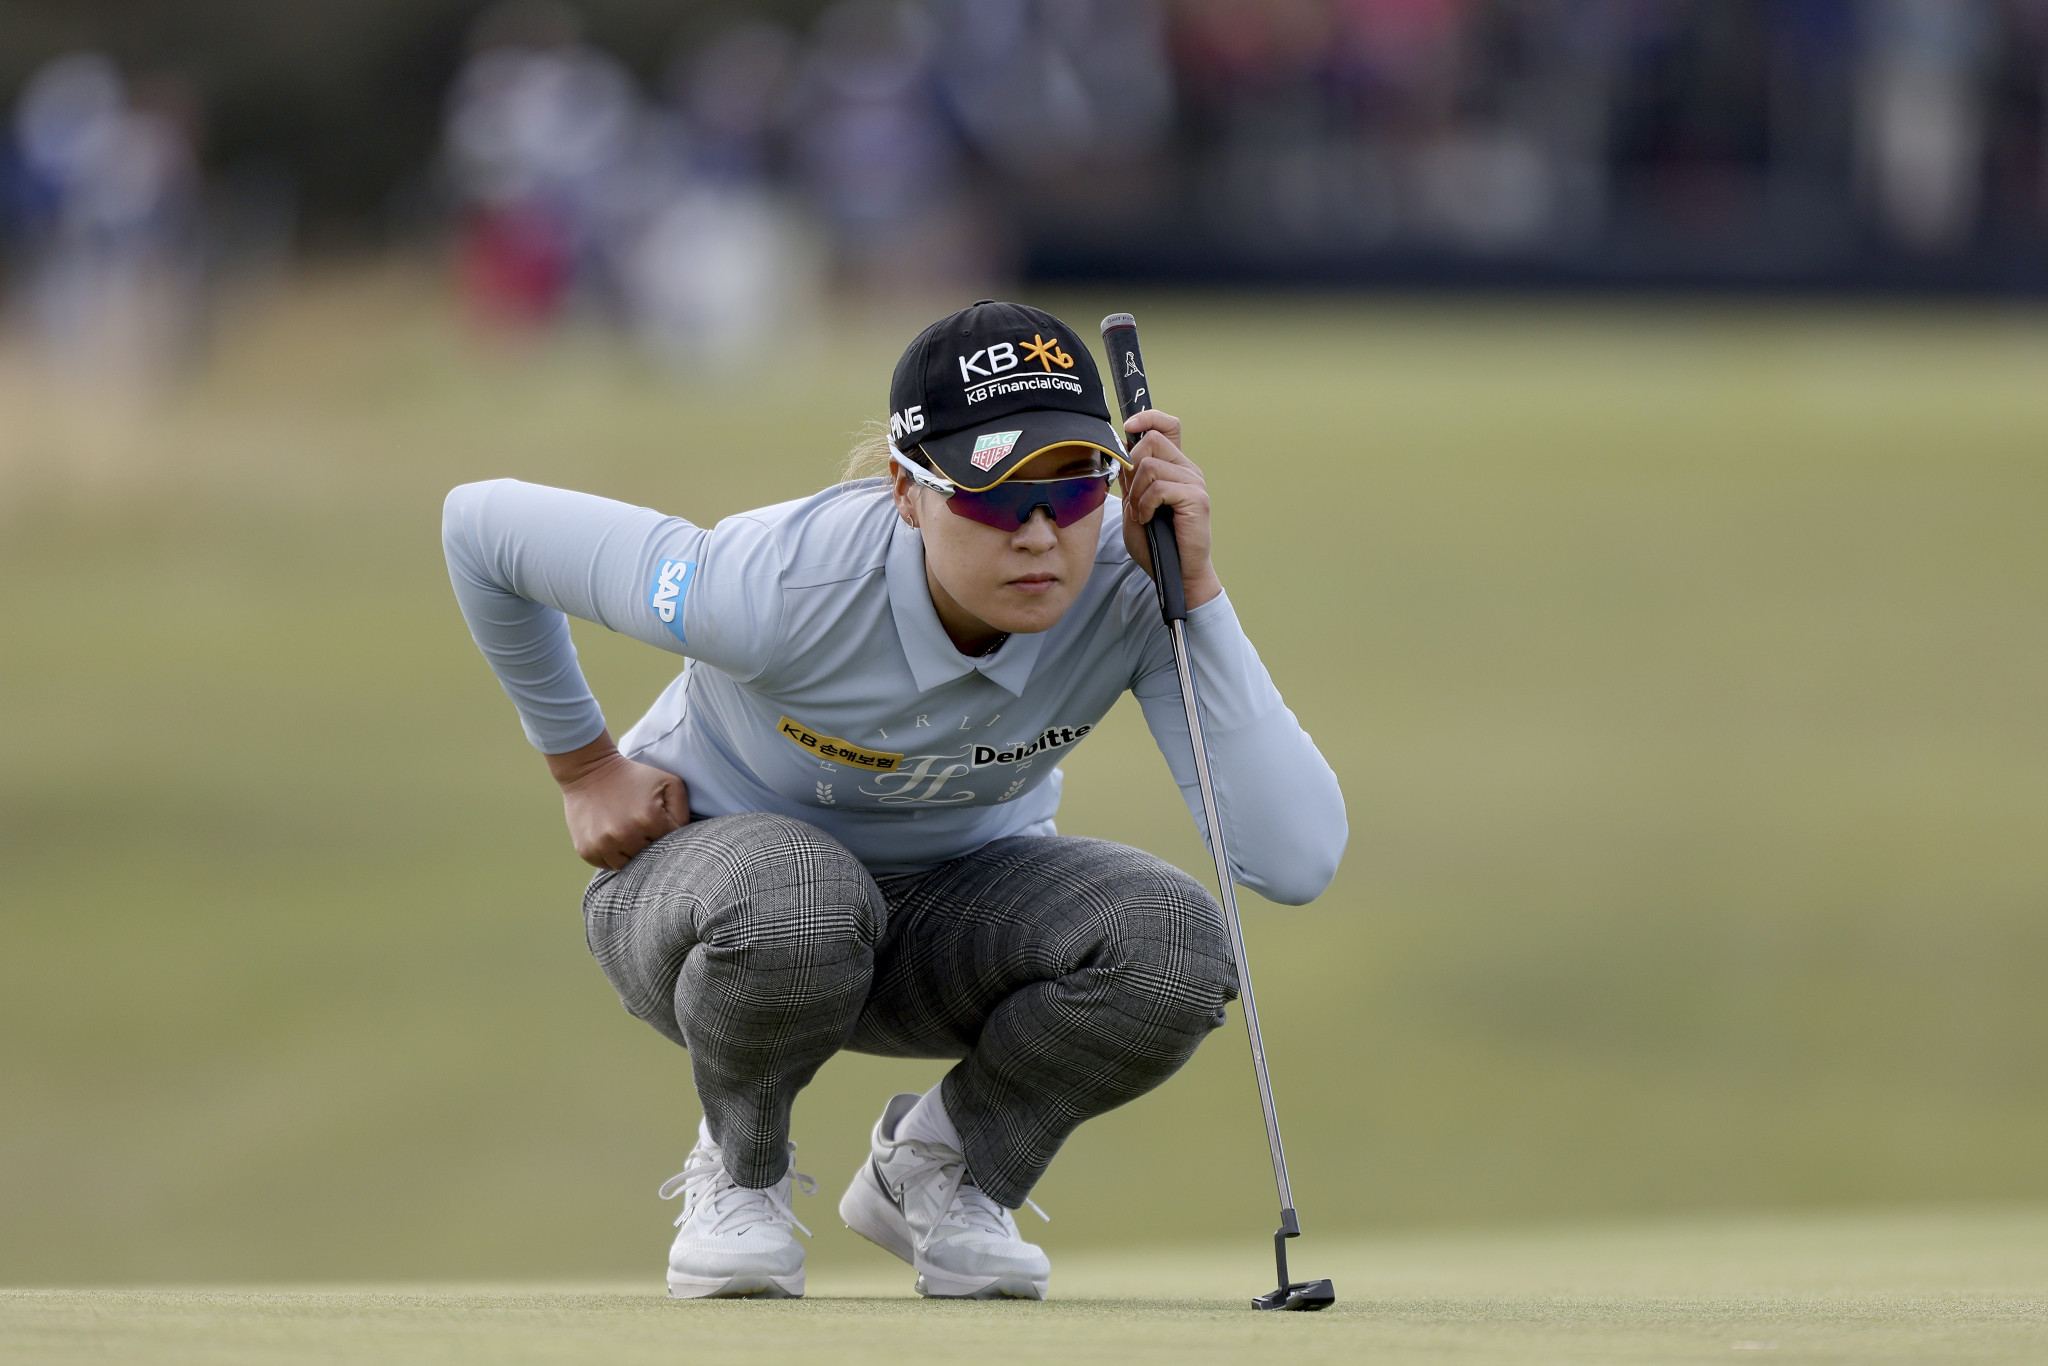 Chun credits bet with caddie in helping to reach Women's Open golf top spot